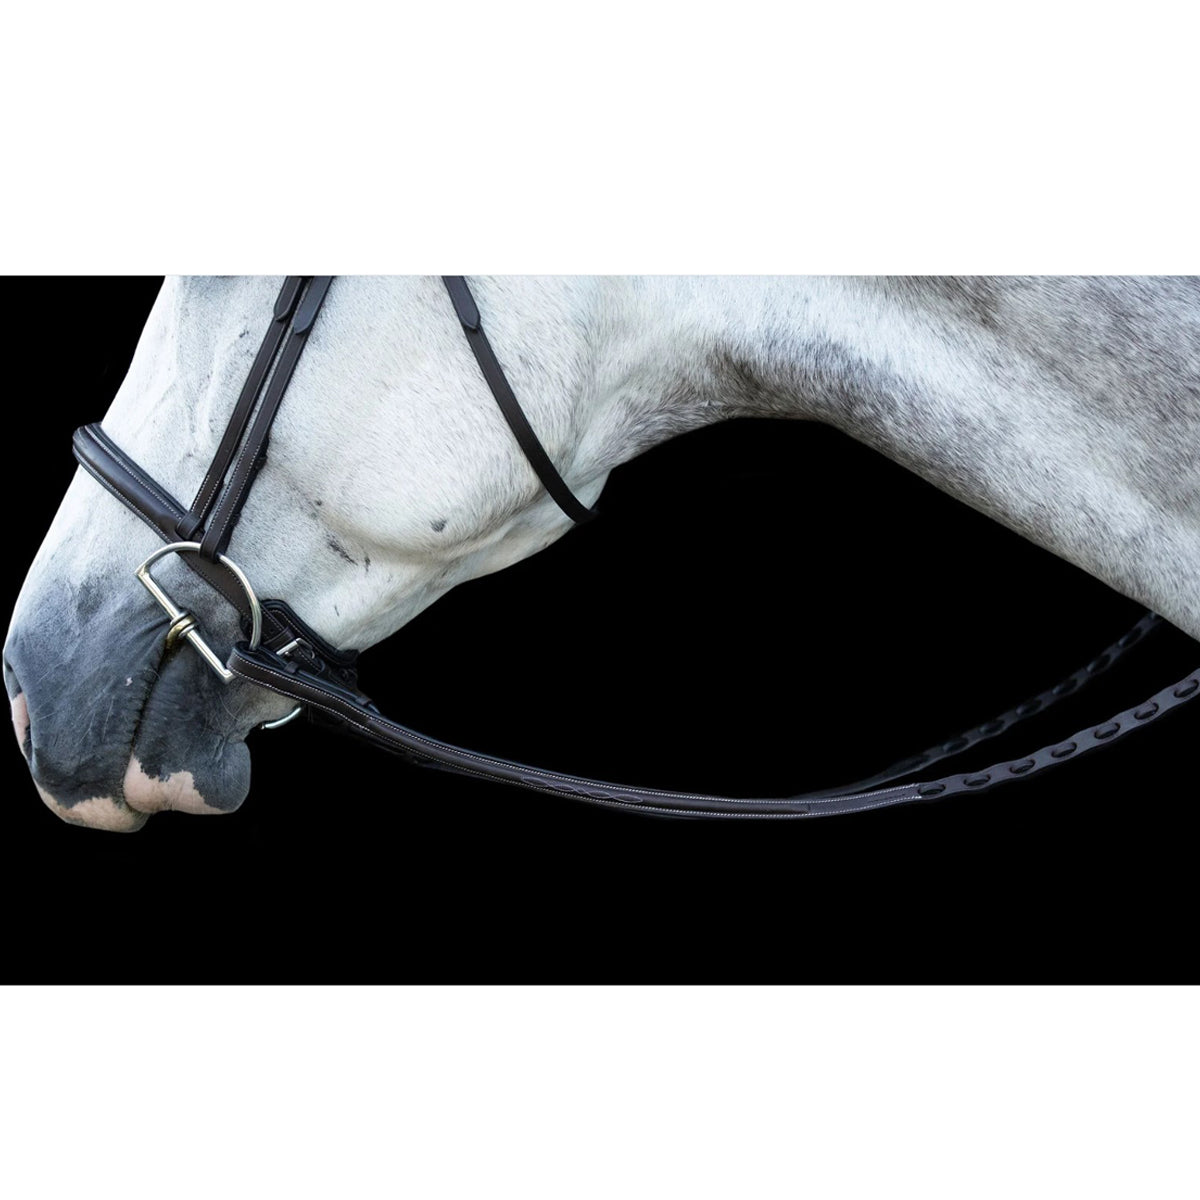 EHI ProSeries Perfect Reins